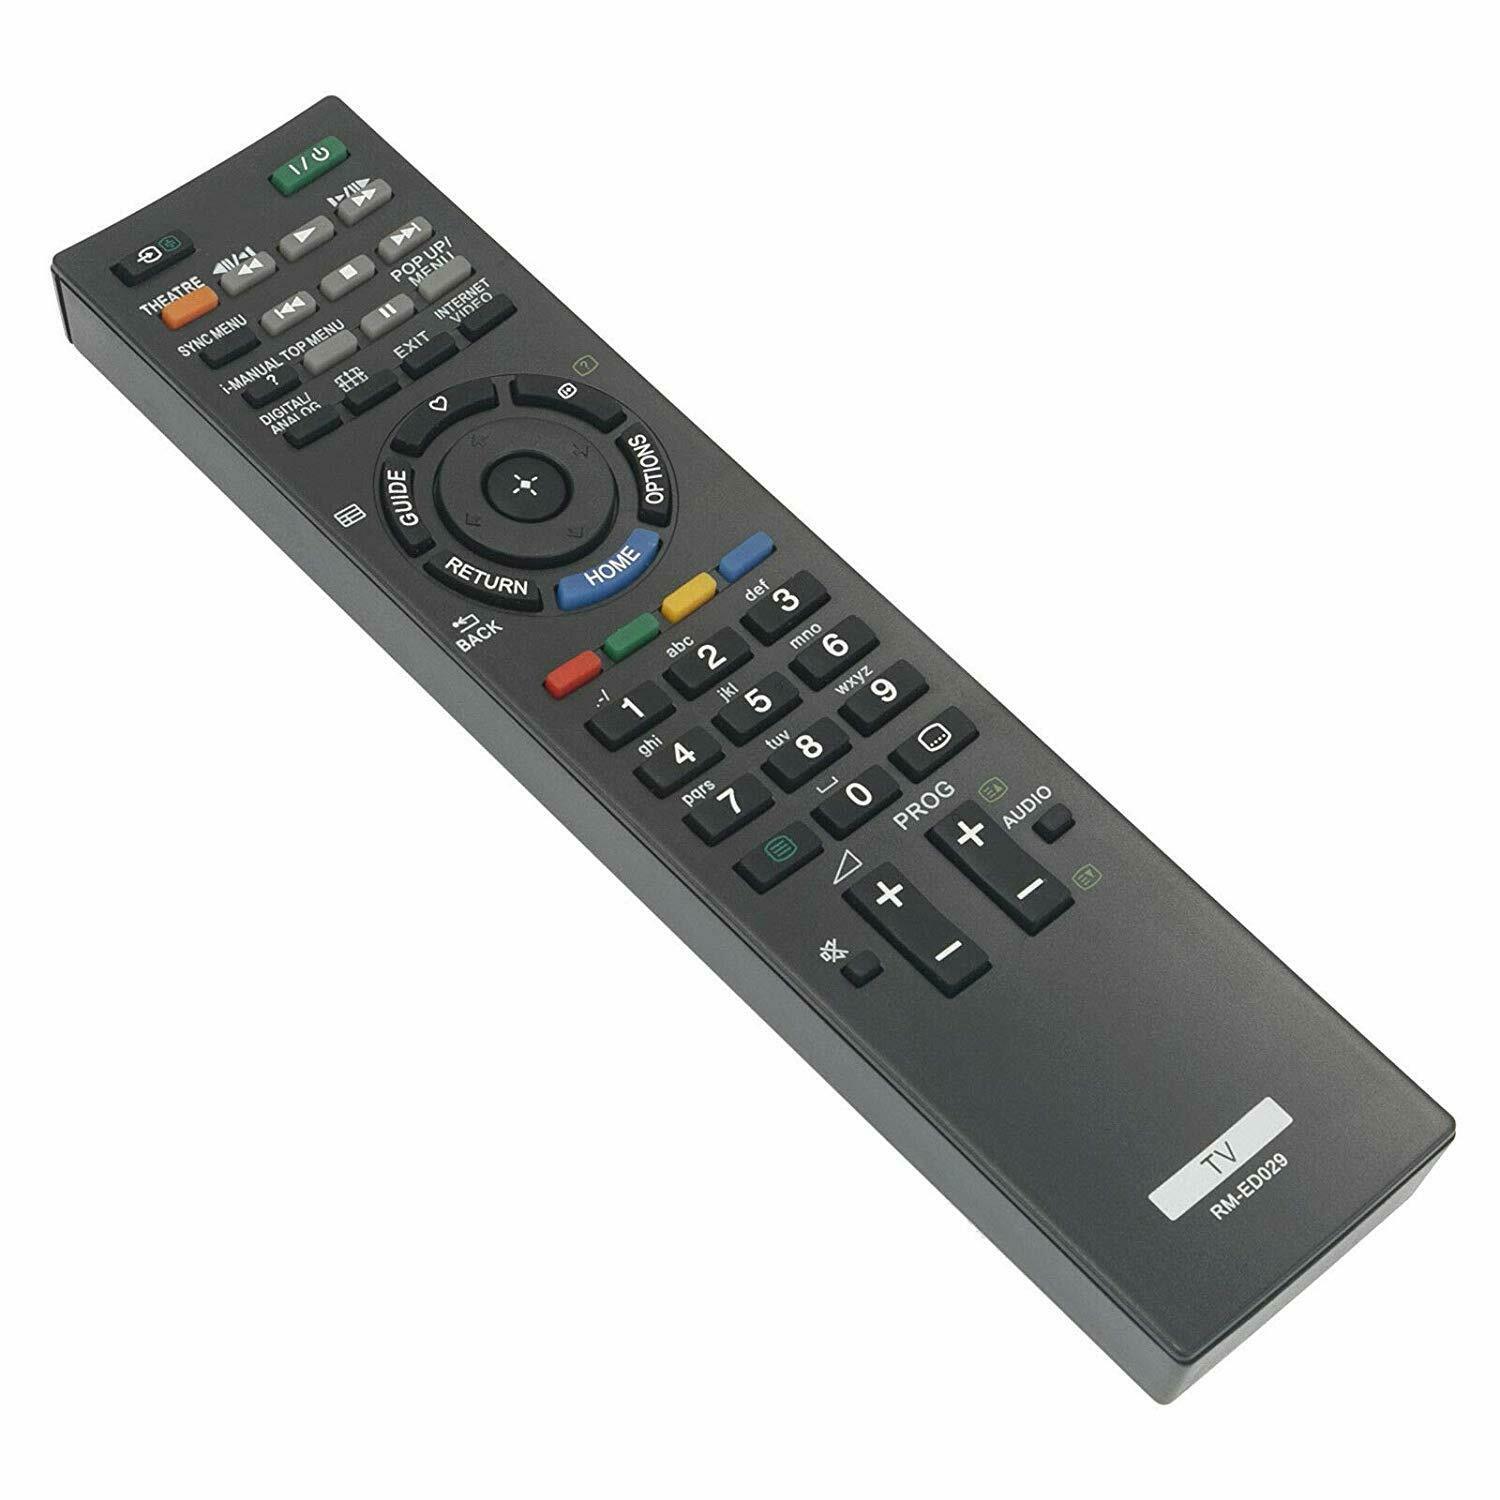 RM-ED029 Remote Replacement for Sony KDL-40EX40B KDL-40EX43B KDL-32EX40B KDL-32EX43B